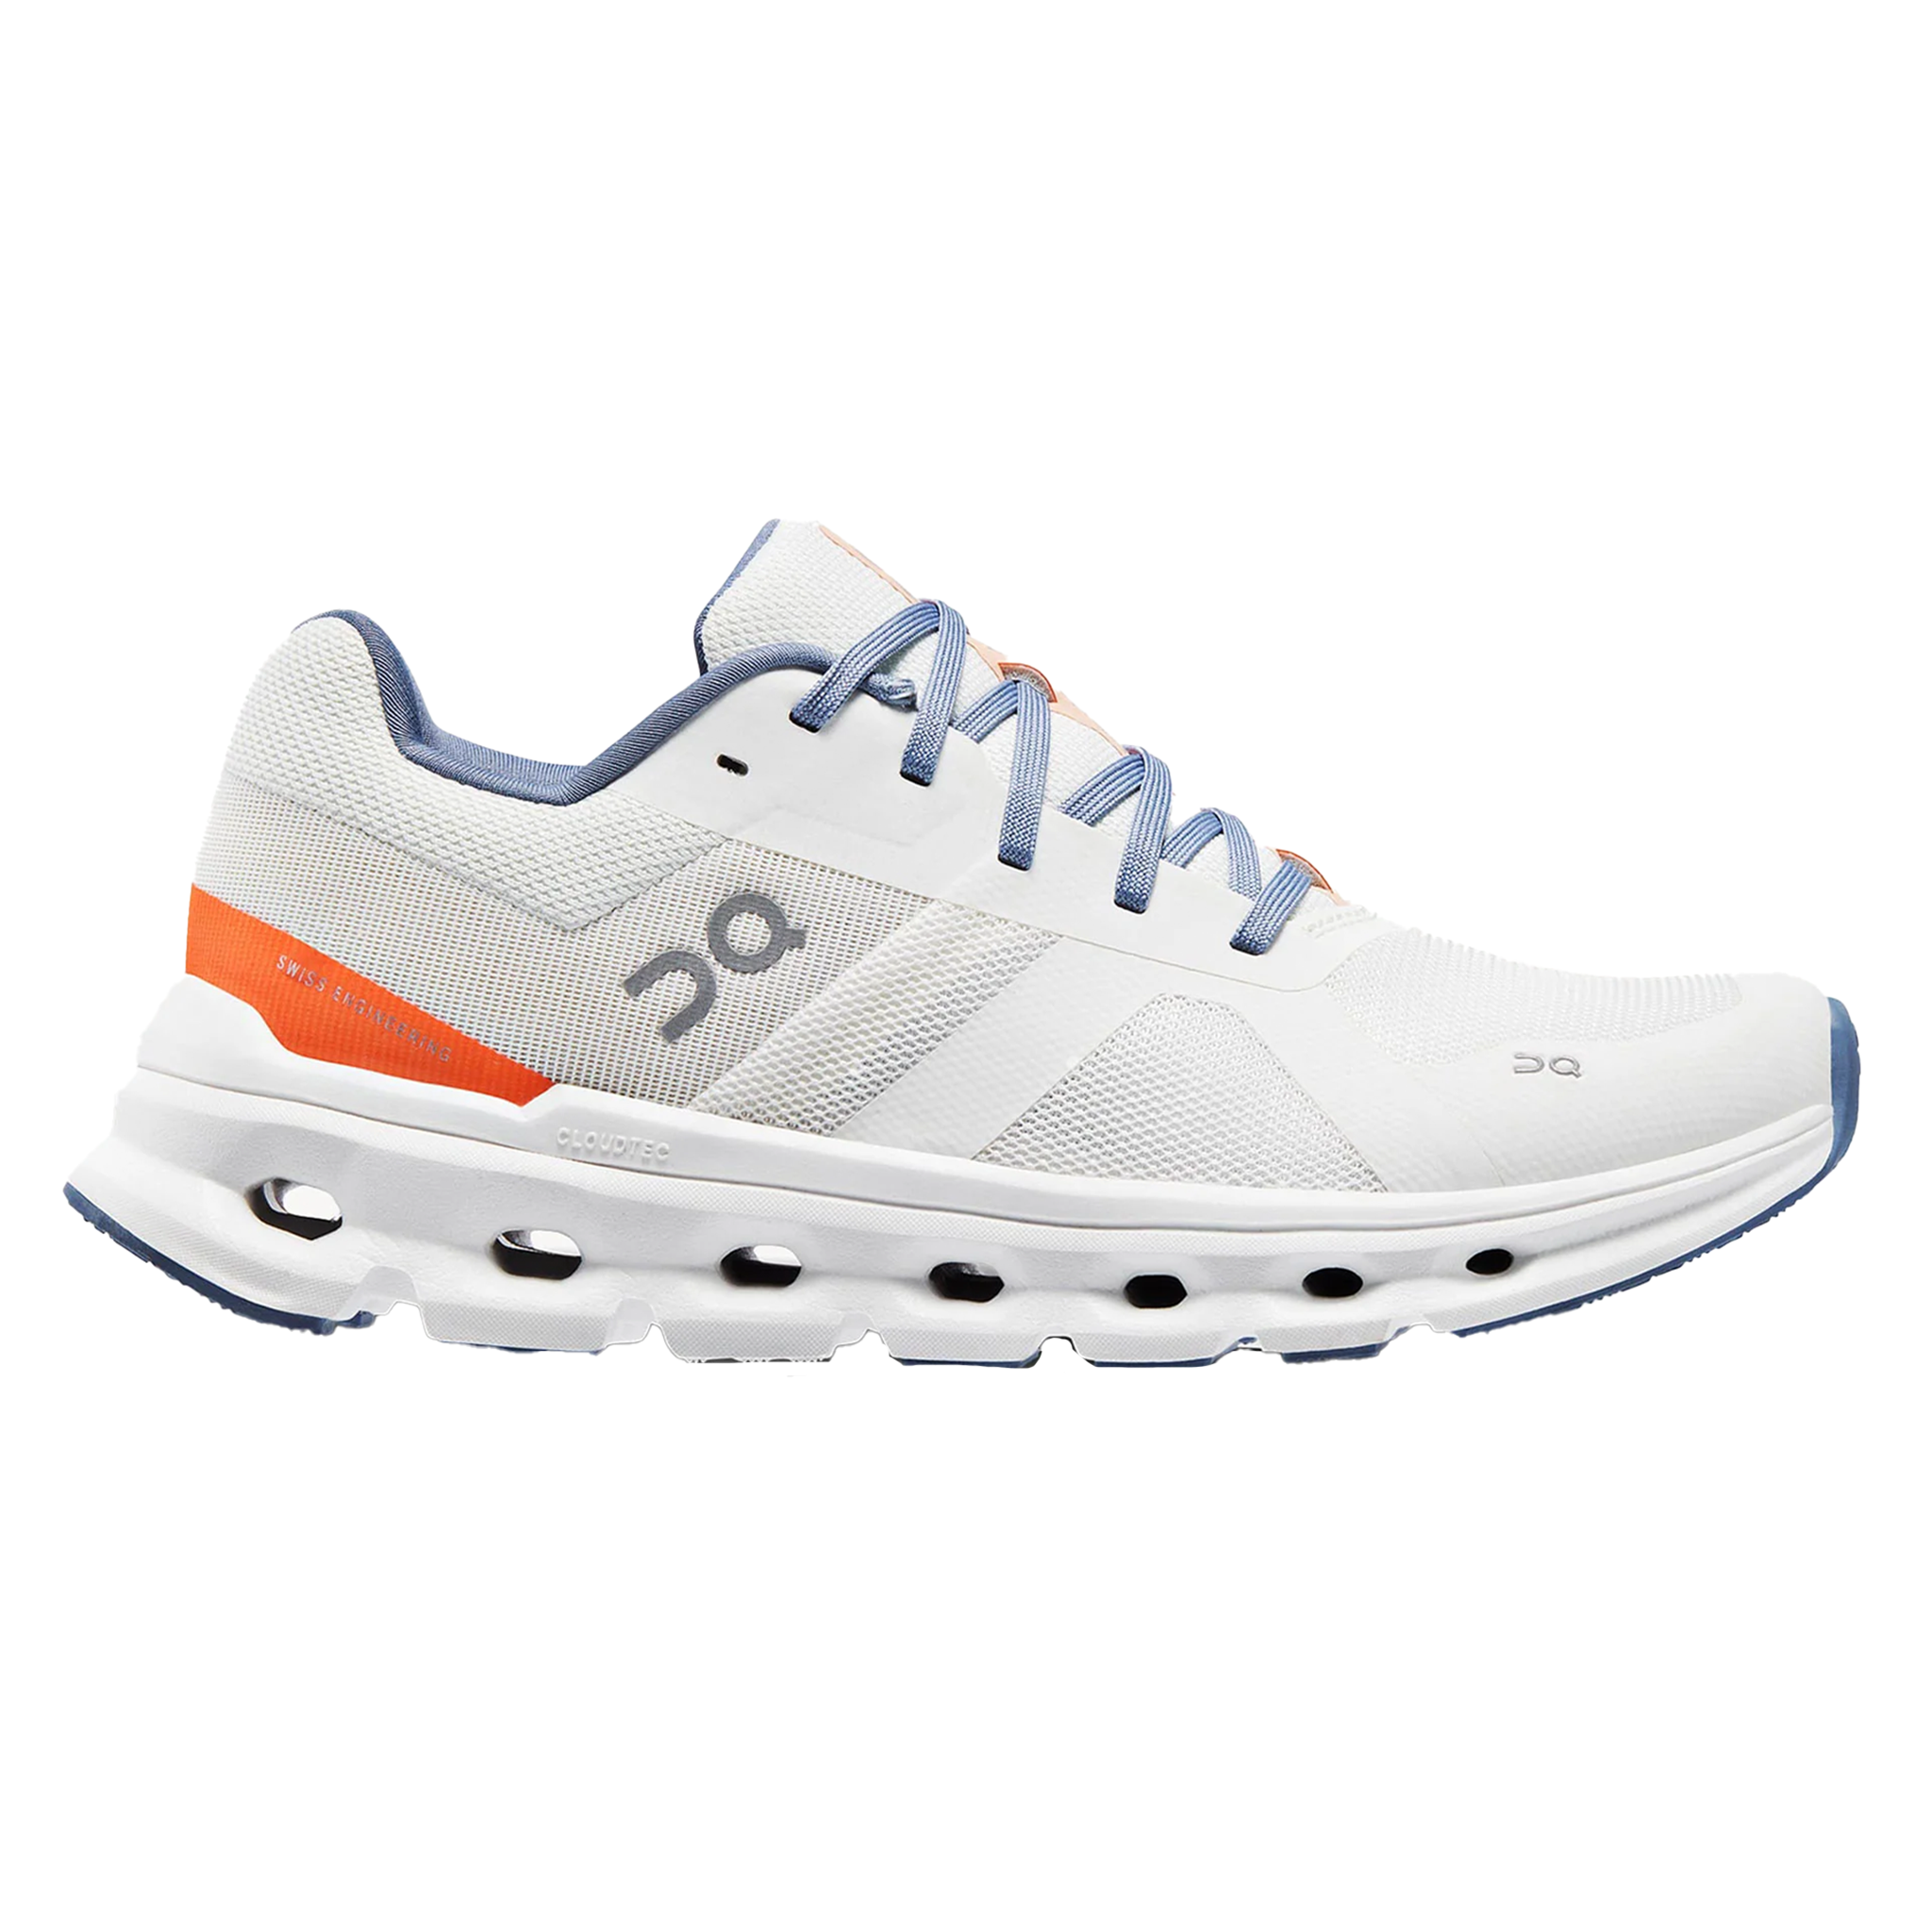 ON Mens Cloudrunner - Undyed-White/Flame - Stability